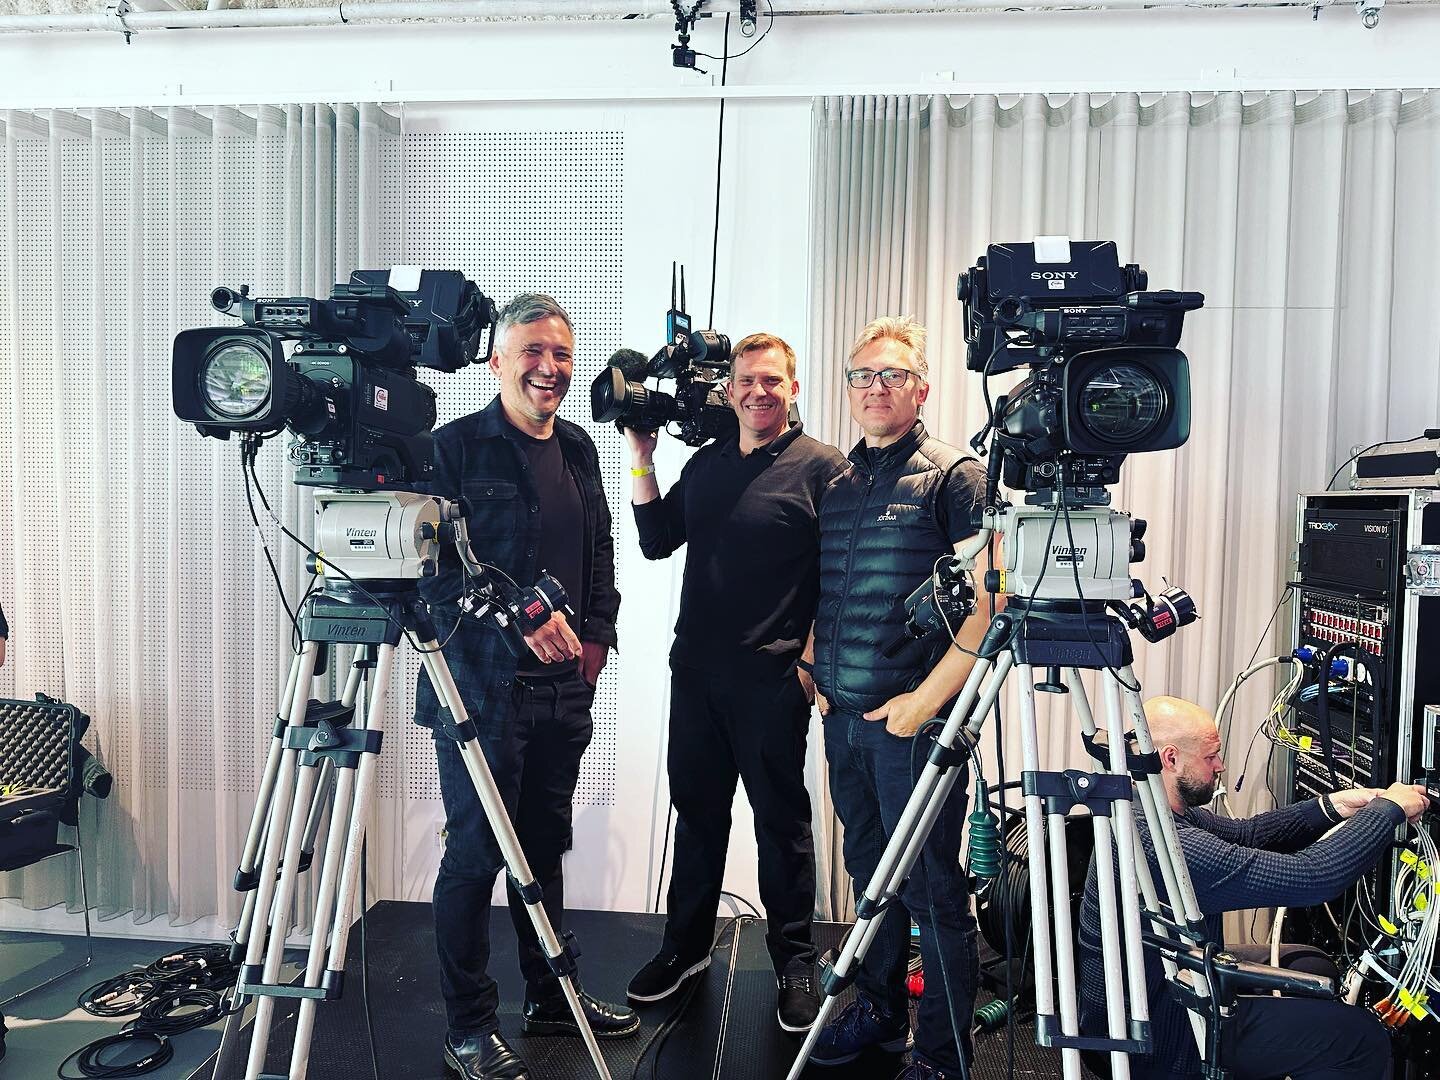 The Renegade Live / Little Ginger gang are out in force conducting a high end live stream for an event at The Science Museum today.  Utilising 4x Sony HDC-3500 4K broadcast cameras,  SMPTE Fiber and Wireless connectivity, a kitted out Portable Produc